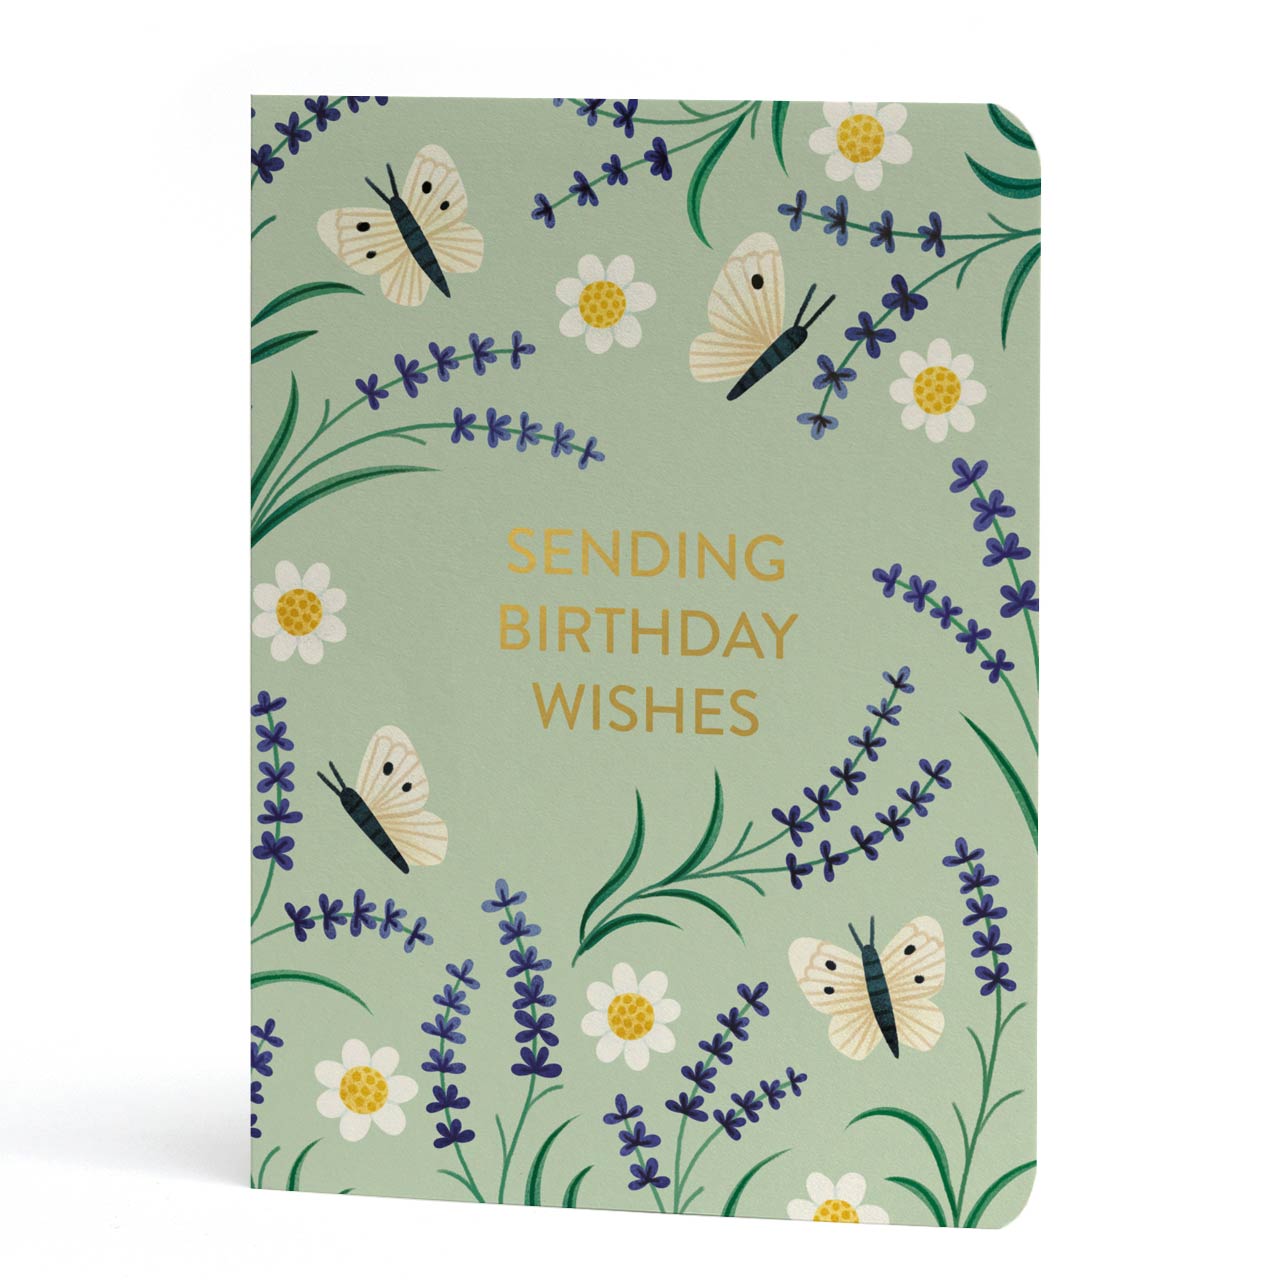 Sending Birthday Wishes Gold Foil Lavender Seed Card